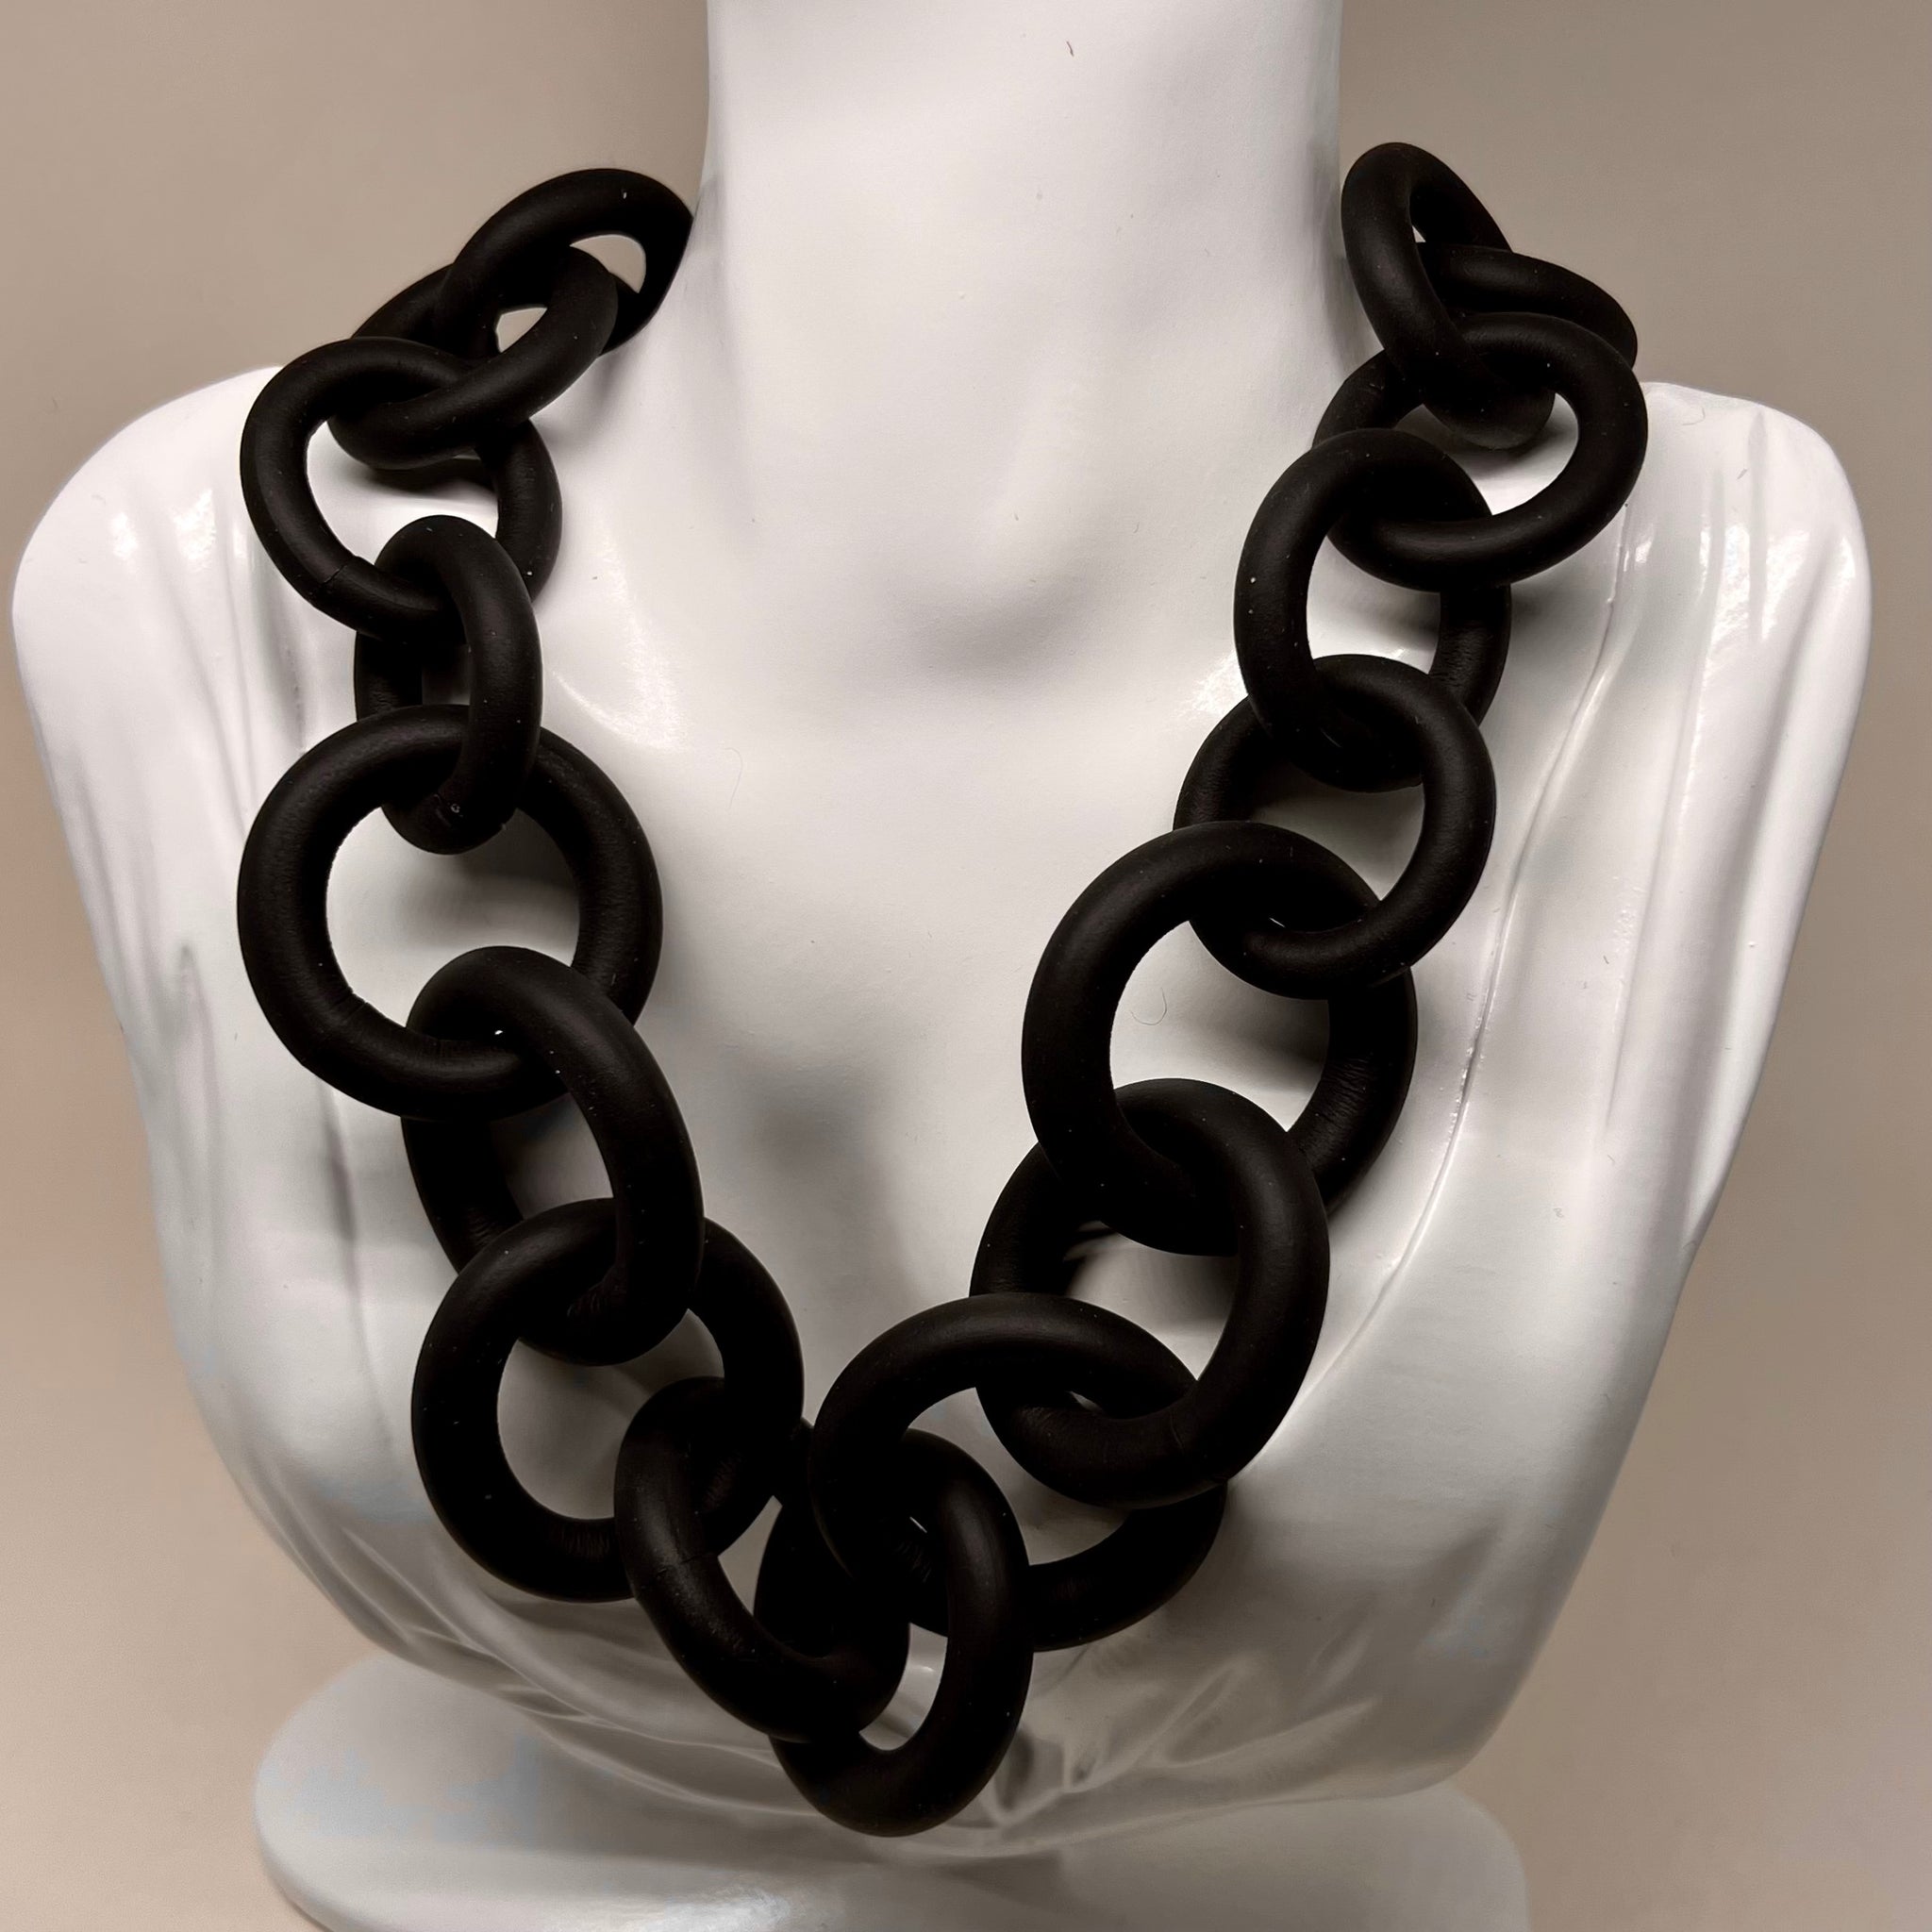 Simple rubber necklace by Nyet Jewelry